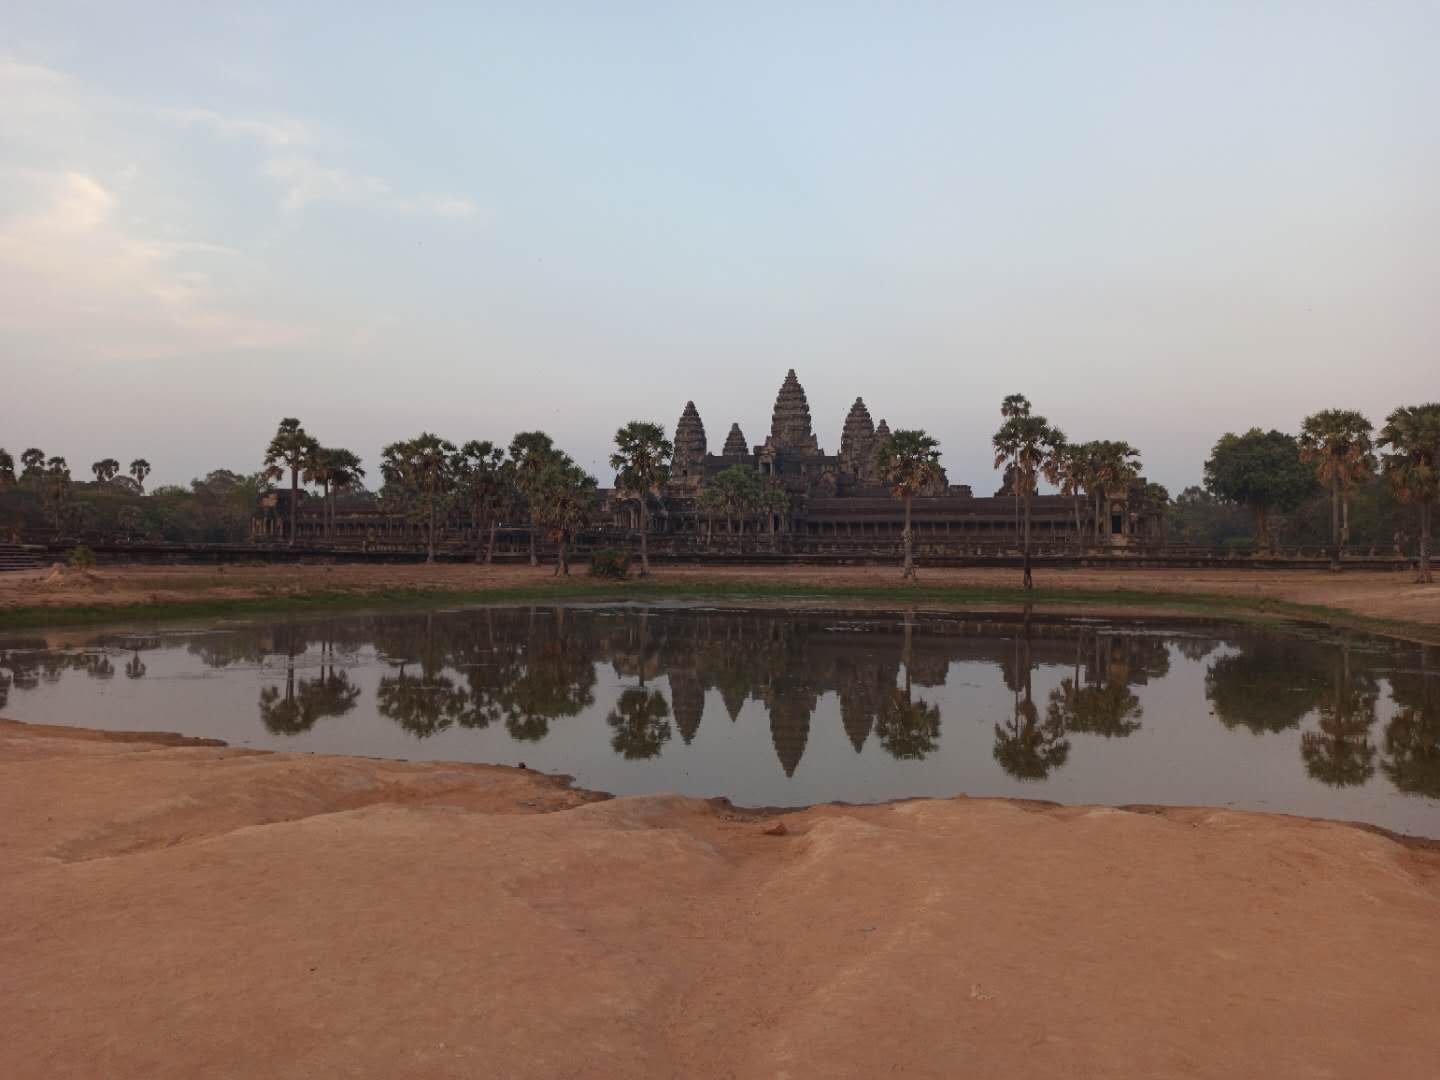 No Hippies at Angkor Wat in Pictures